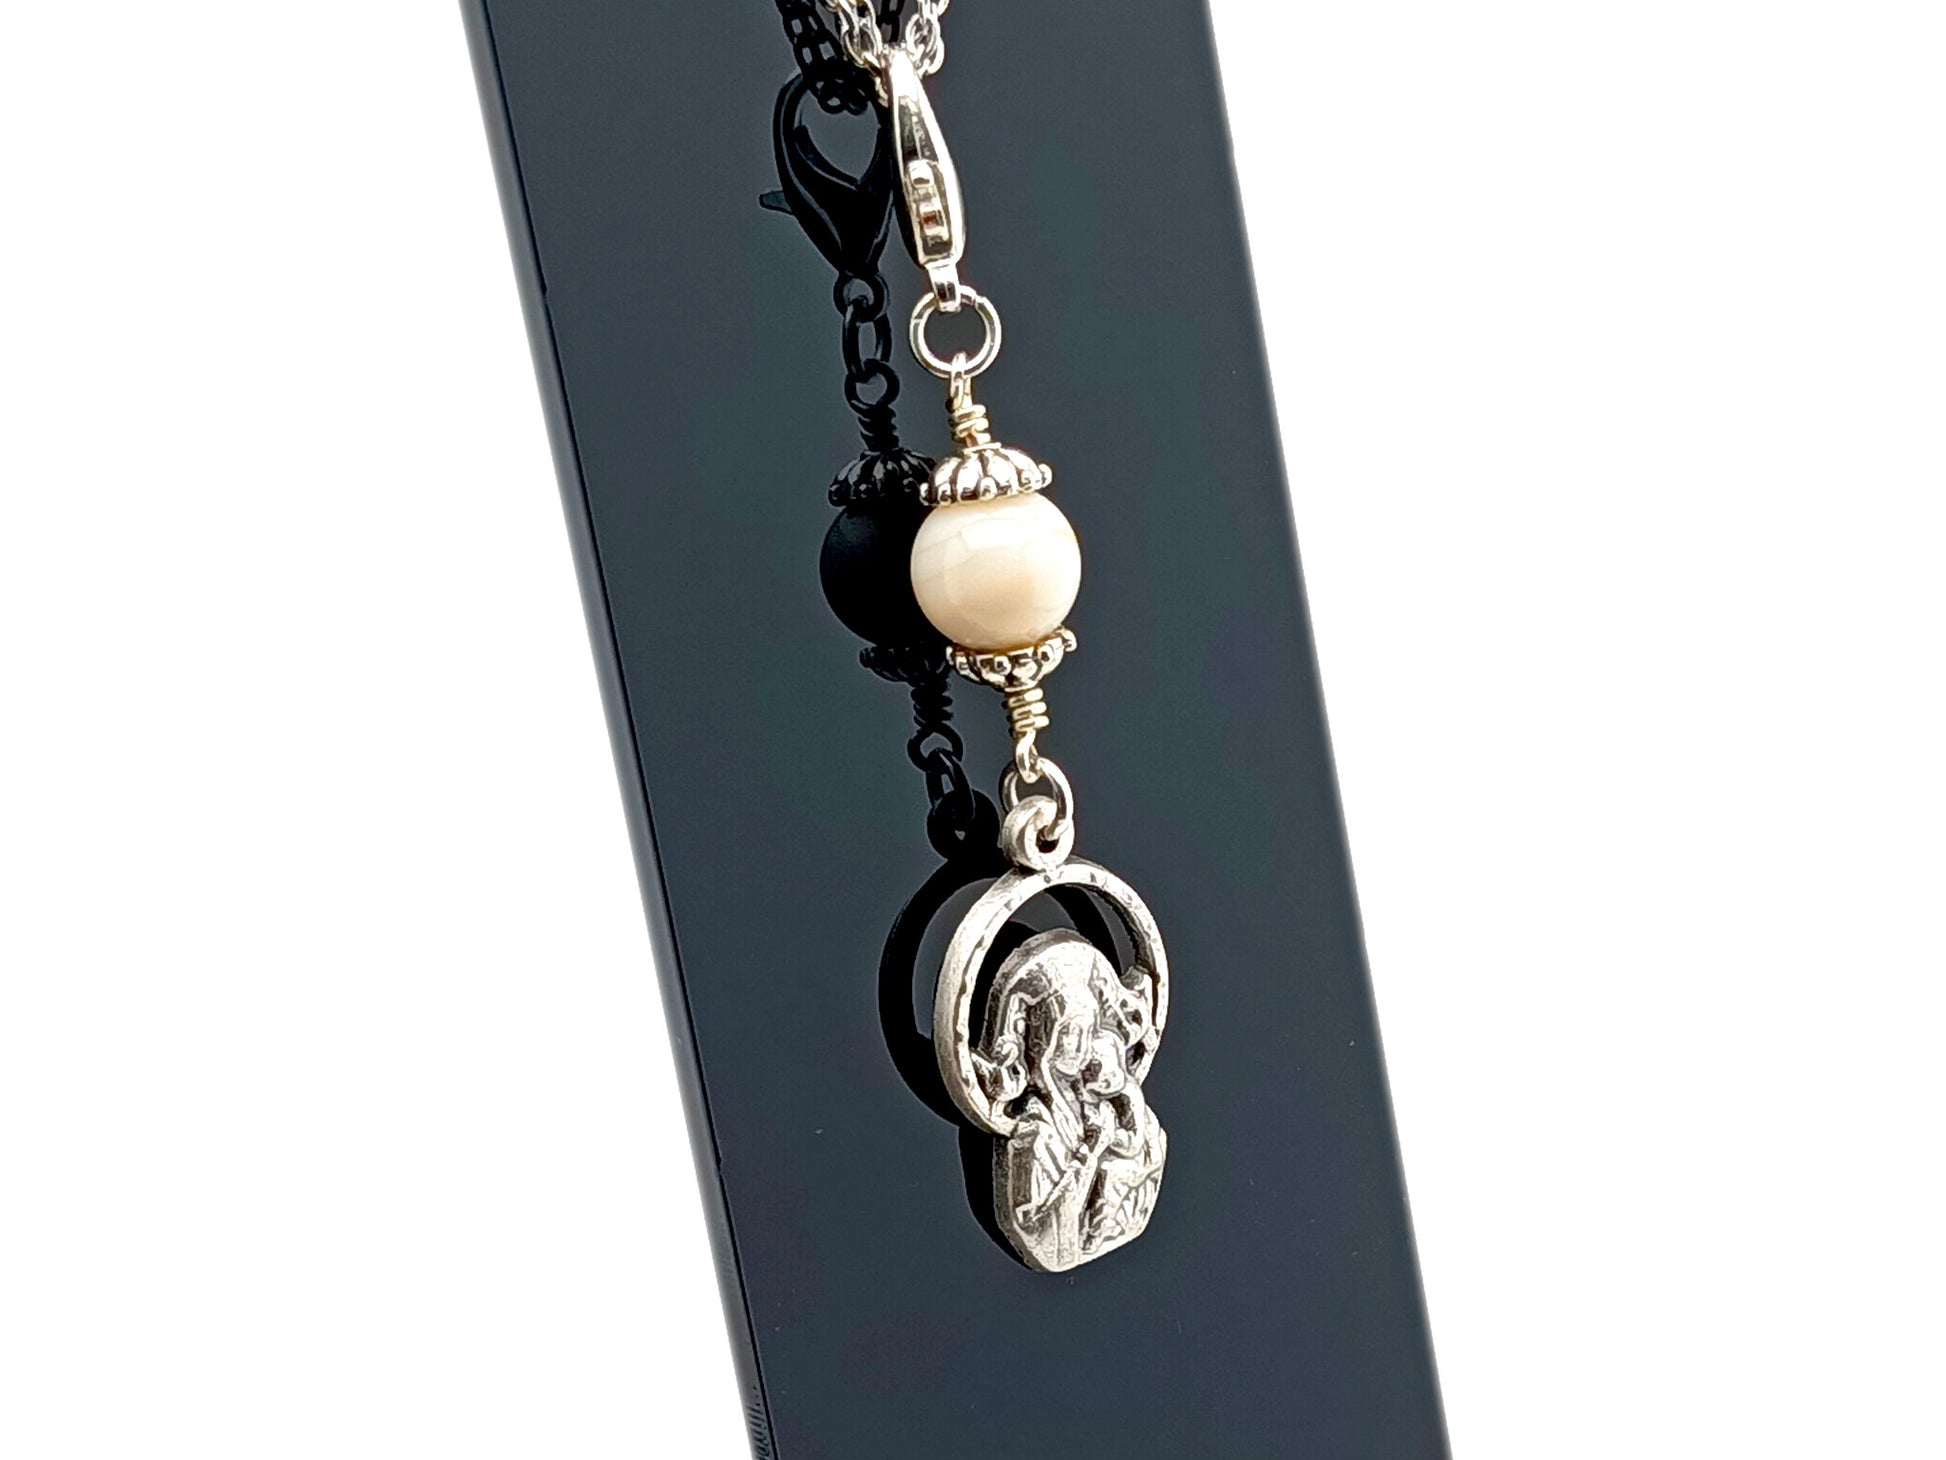 Immaculate Conception unique rosary beads purse clip key chain with mother of pearl bead in unbreakable wire wrapped style with lobster clasp.